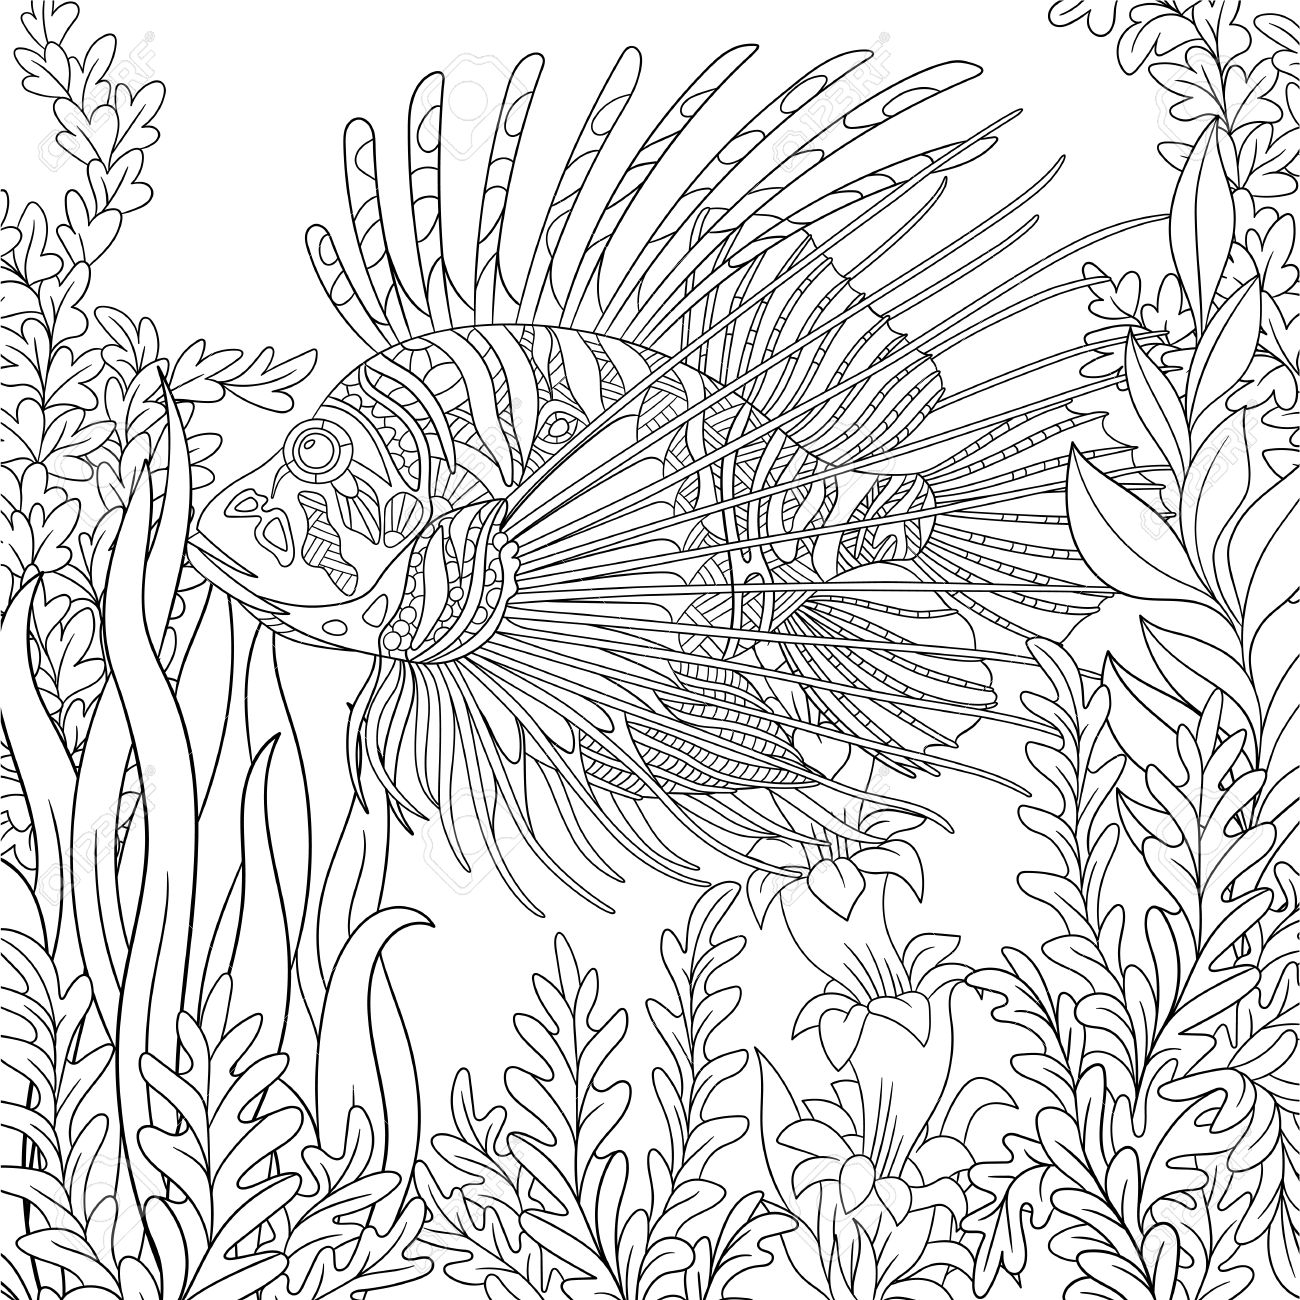 Lionfish Coloring Page at GetDrawings | Free download